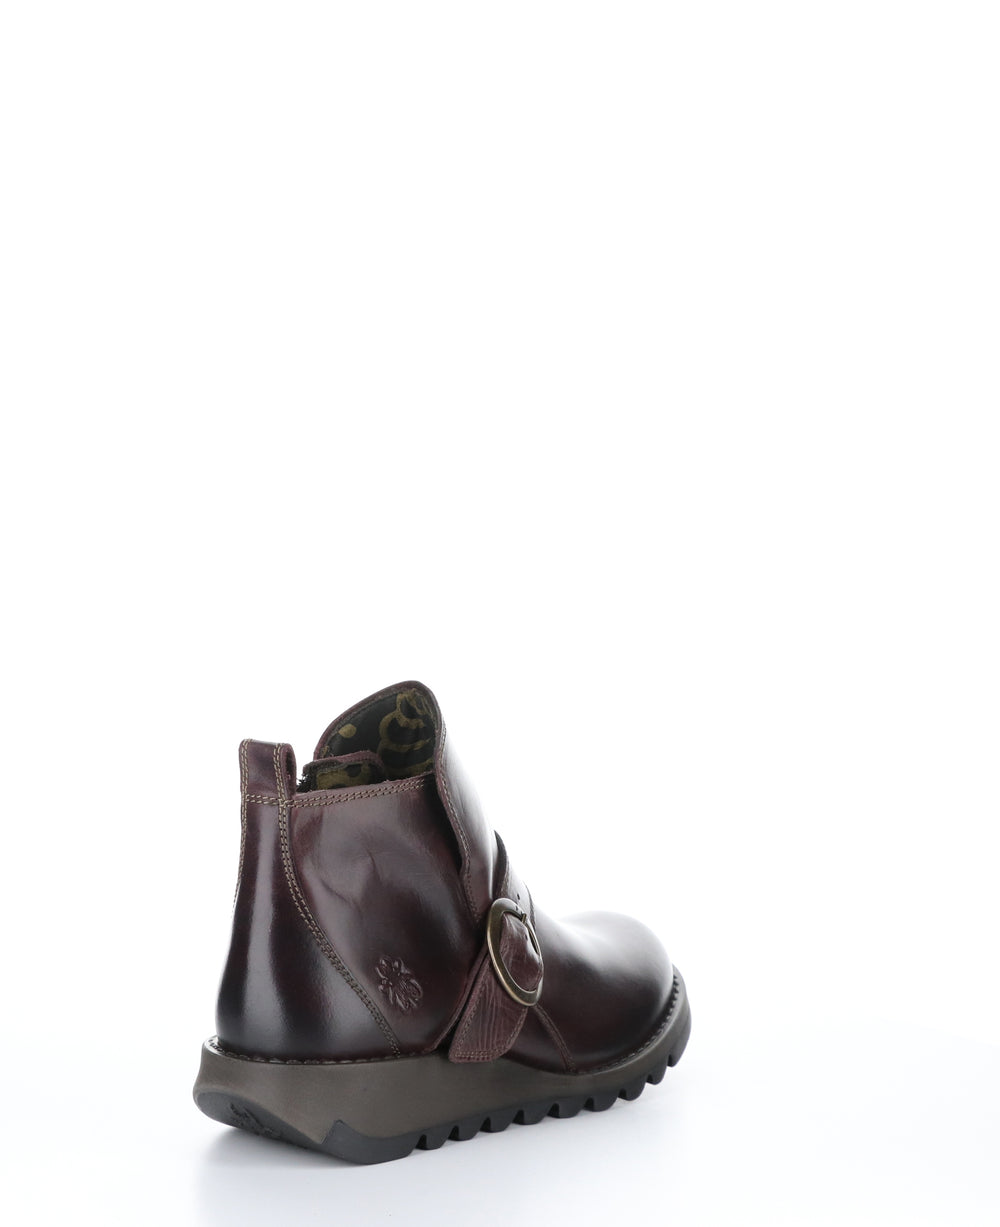 SIAS812FLY Purple Zip Up Ankle Boots|SIAS812FLY Bottines avec Fermeture Zippée in Violet